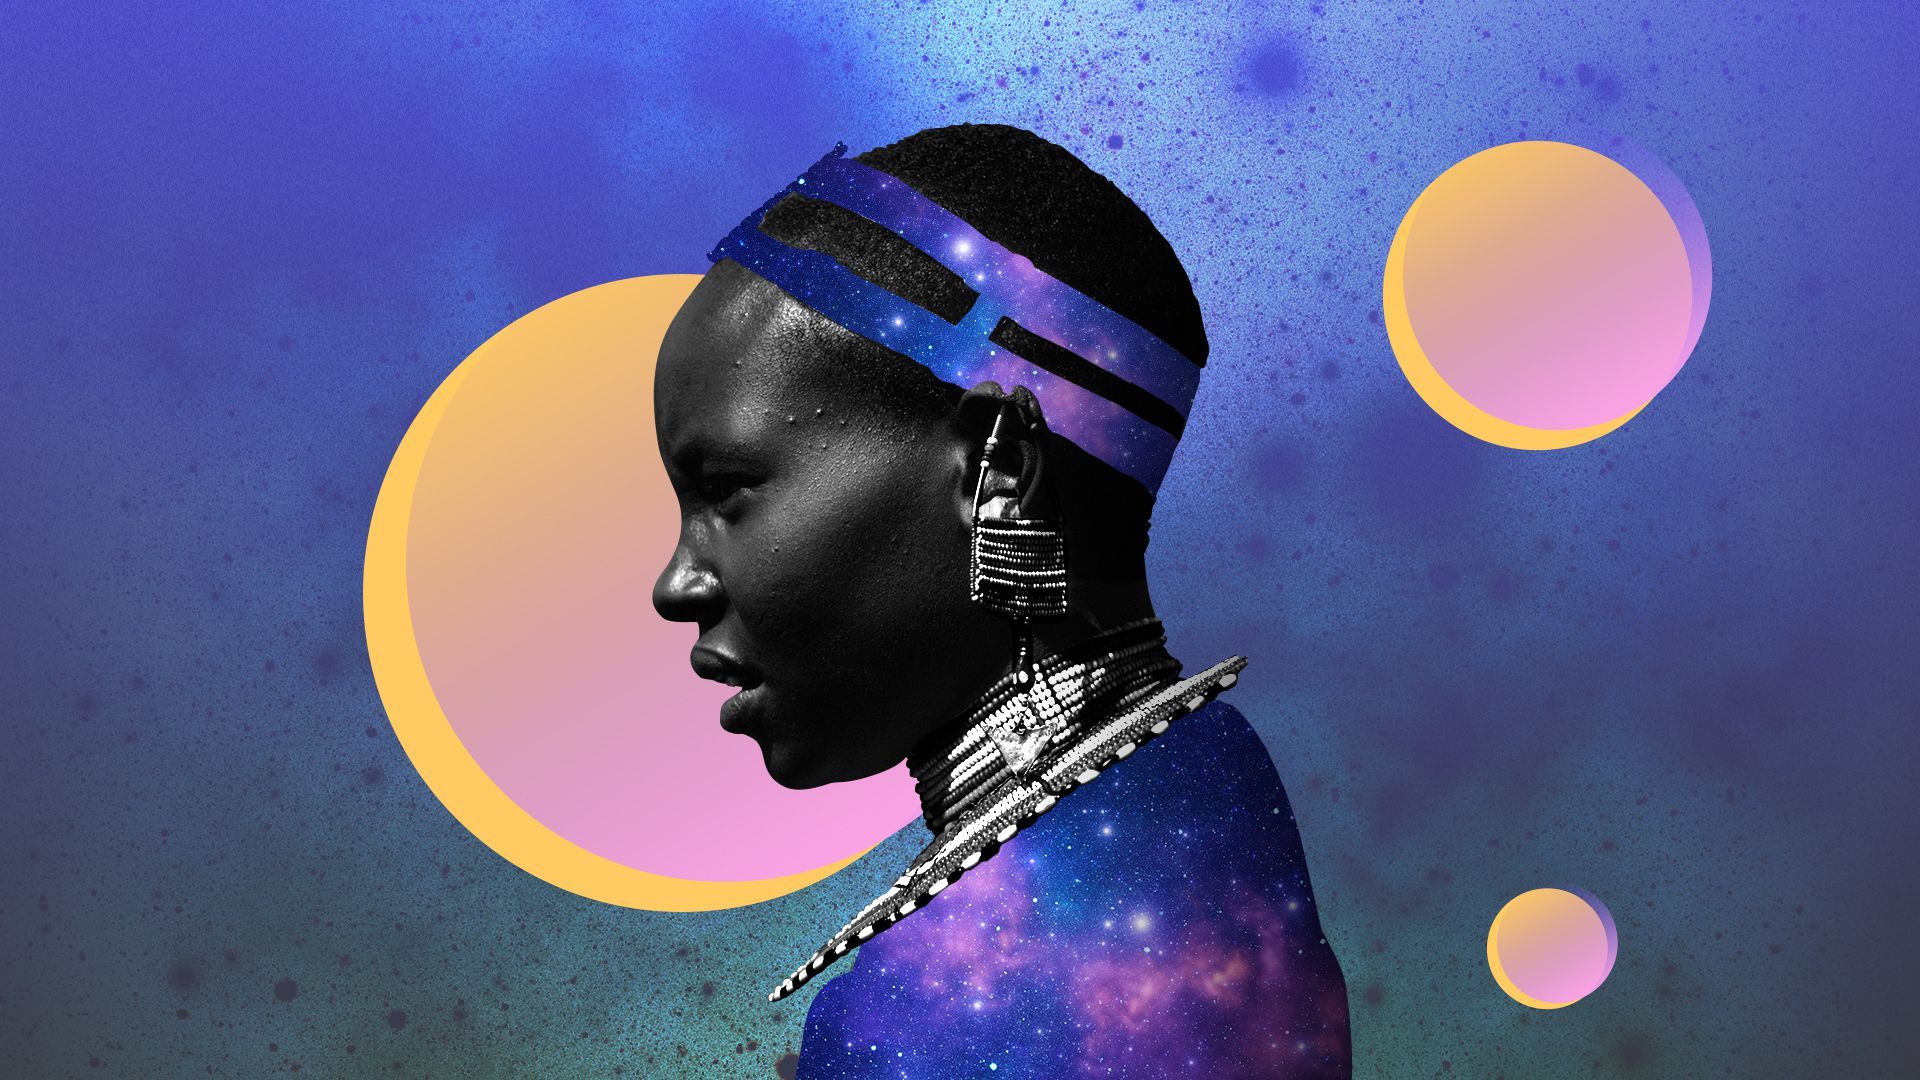 Photo illustration of a Masaï woman juxtaposed with images of galaxies and colorful planets. 